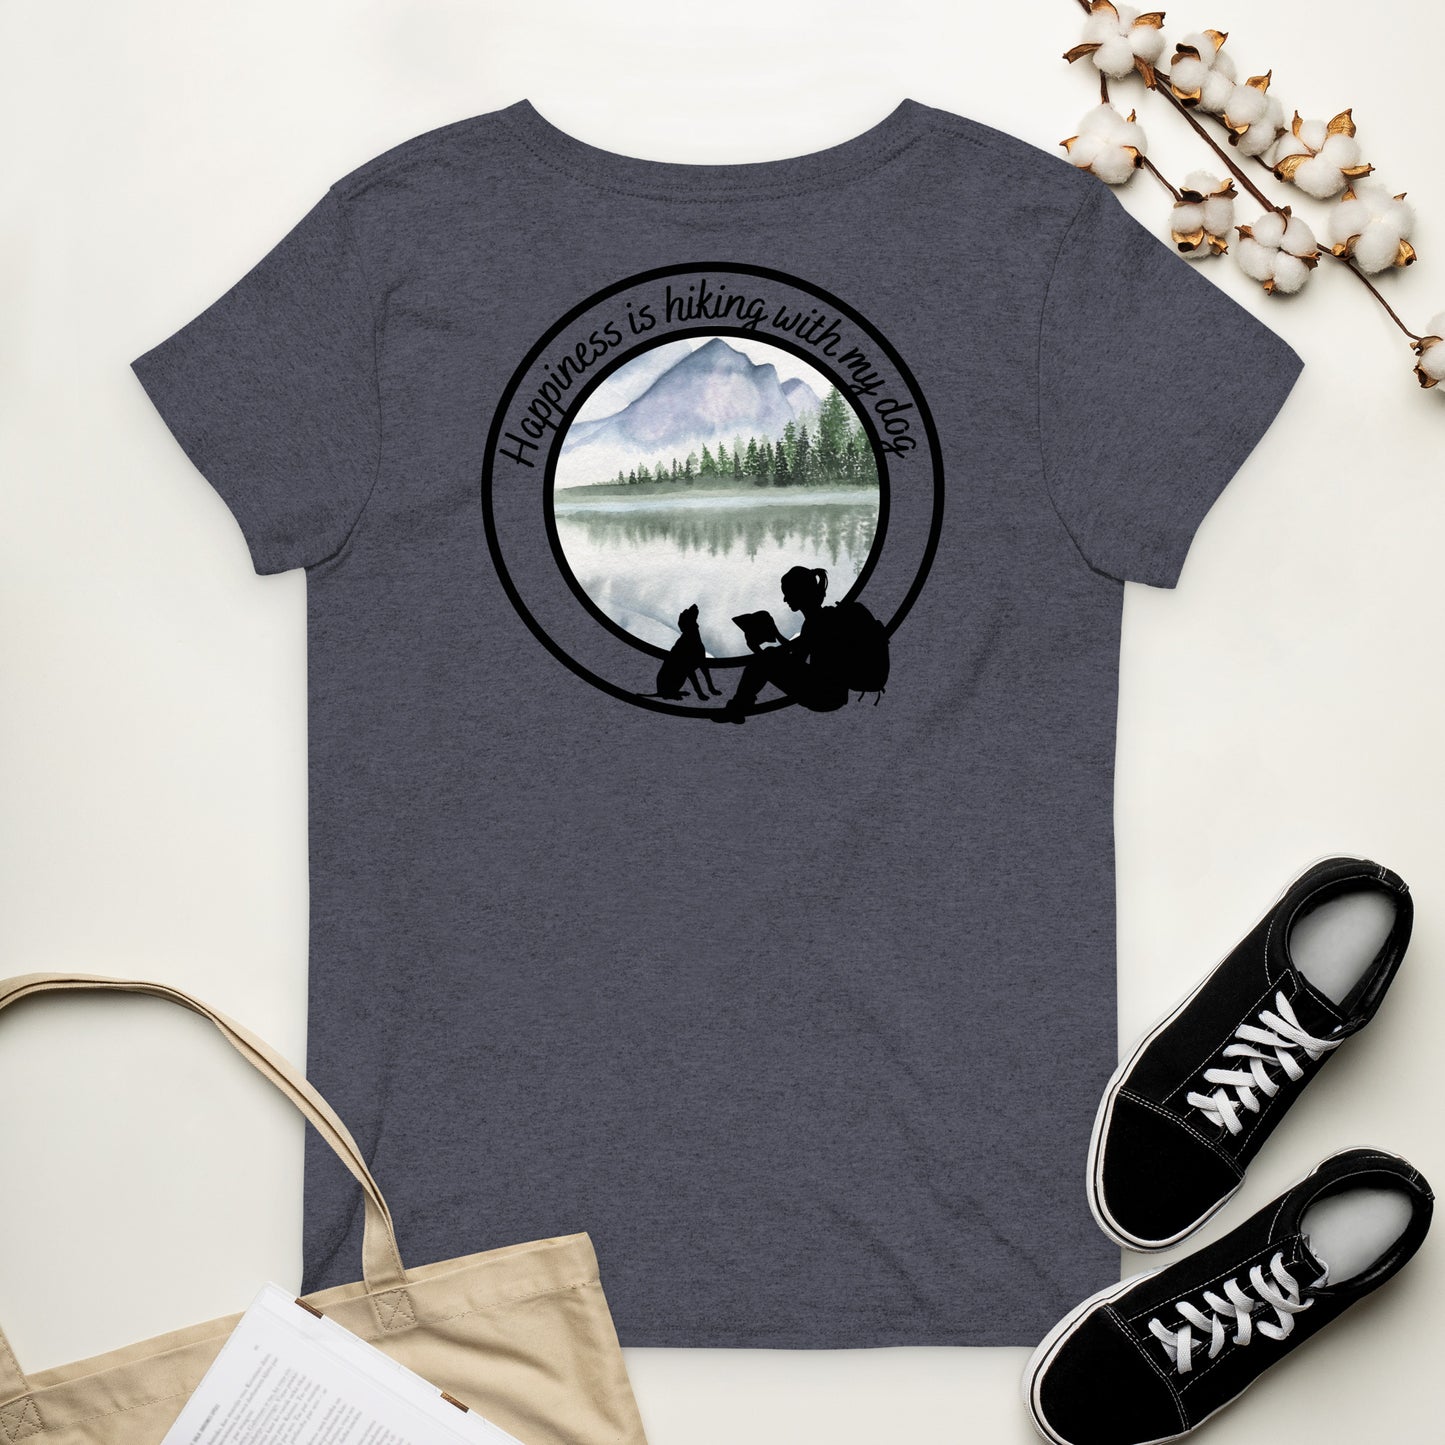 Happiness is hiking with my dog, Women’s v-neck t-shirt